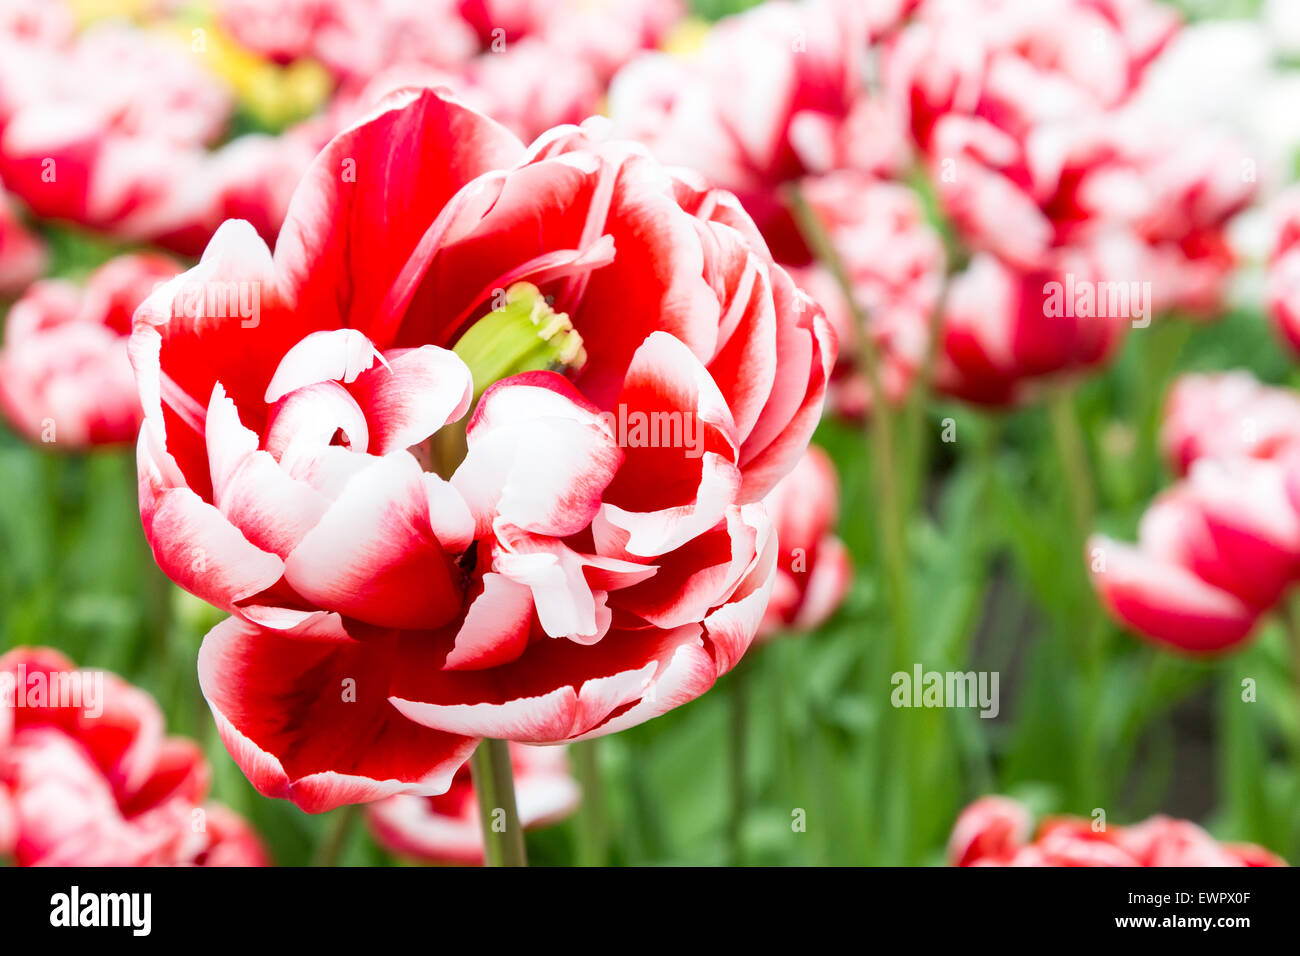 One bicolor red-white tulip in front of many similar flowers Stock Photo